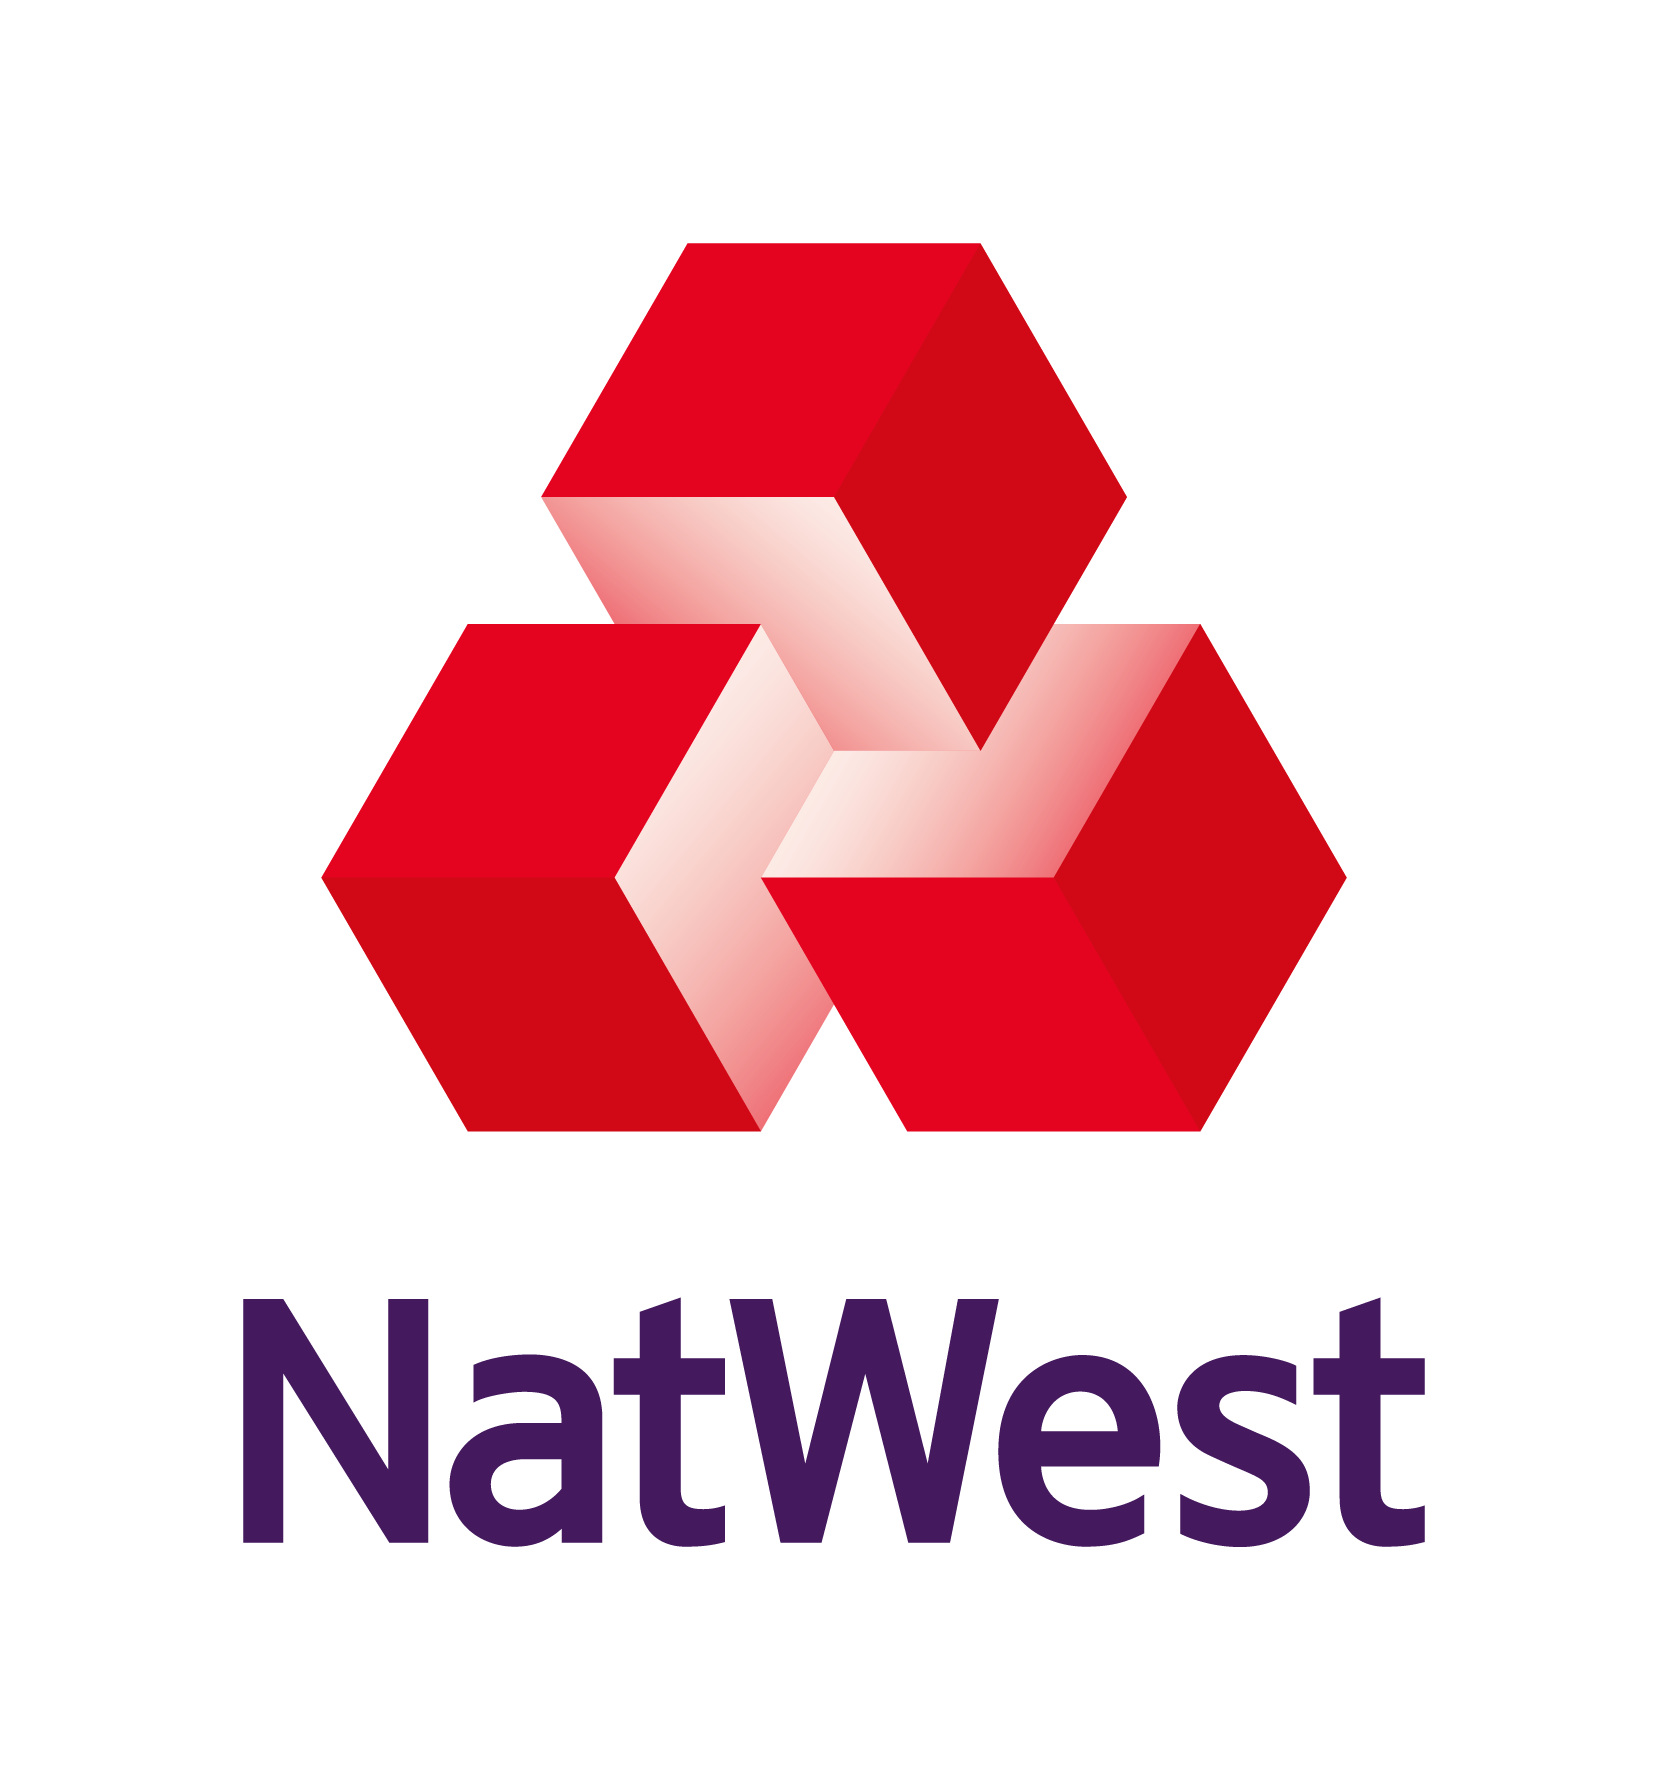 The Prince’s Trust and NatWest launch £5million grant fund for young entrepreneurs affected by coronavirus